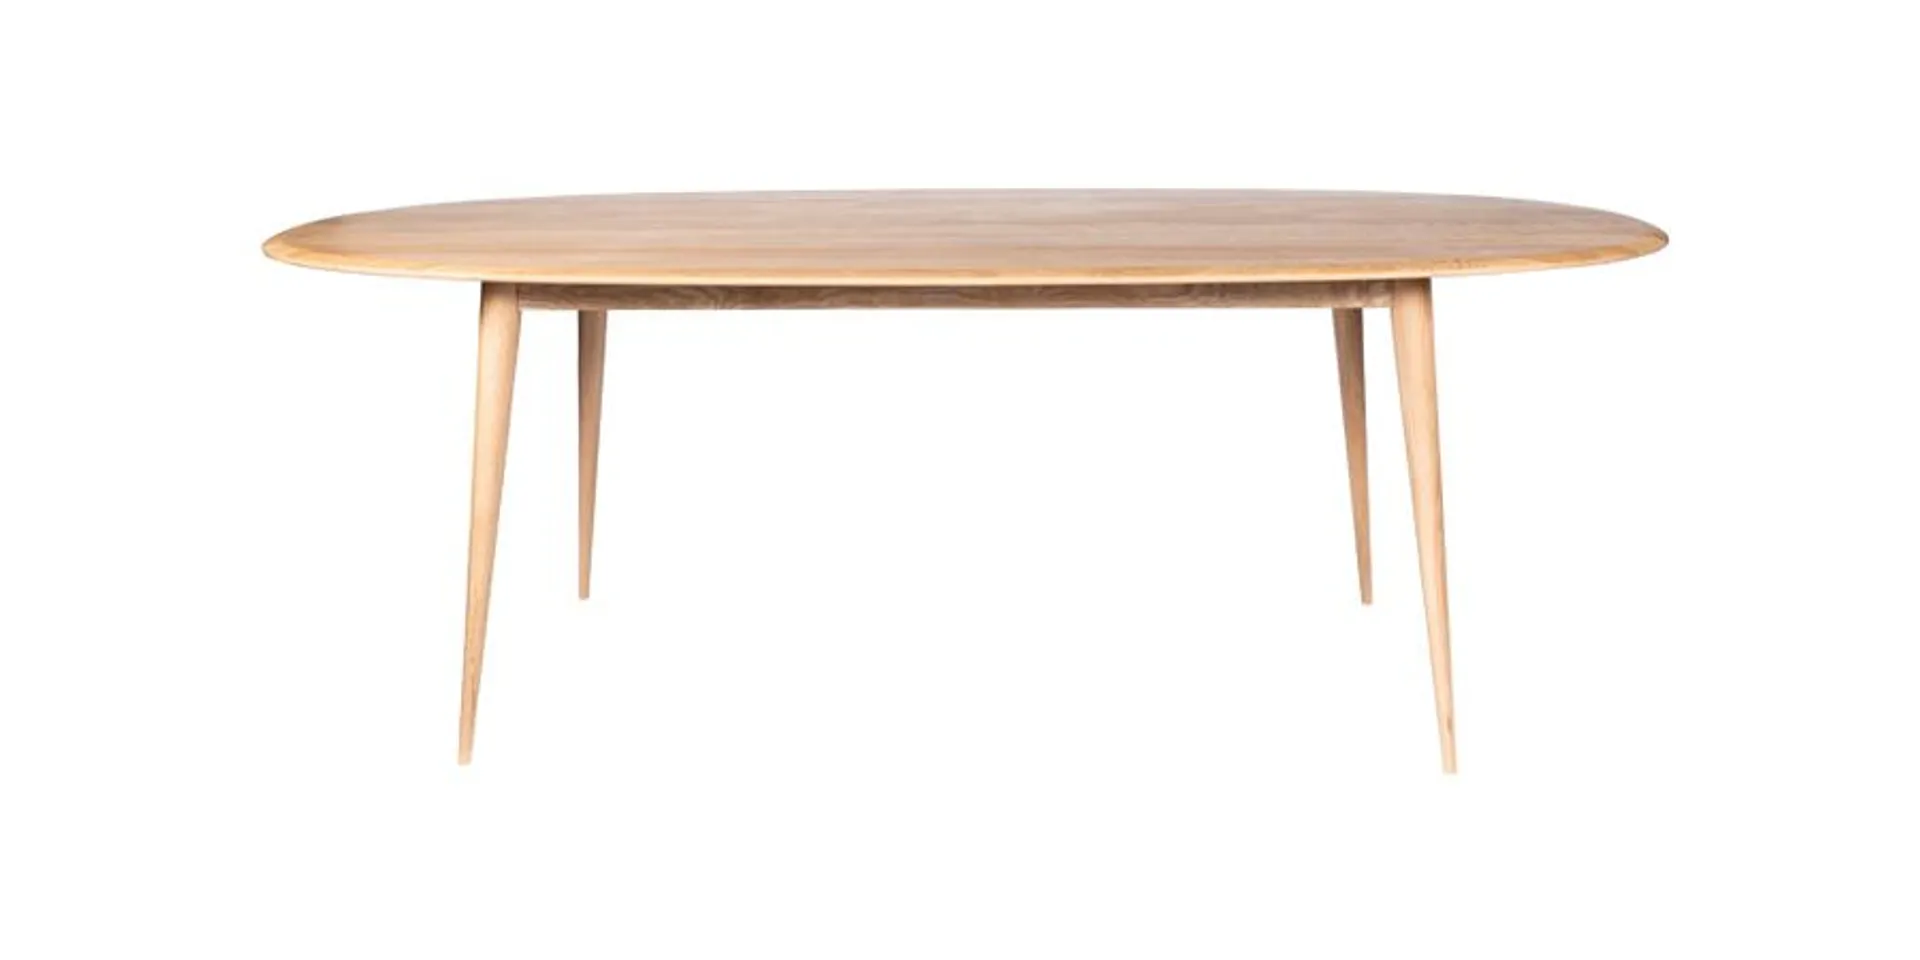 Sloane Oval Dining Table Large